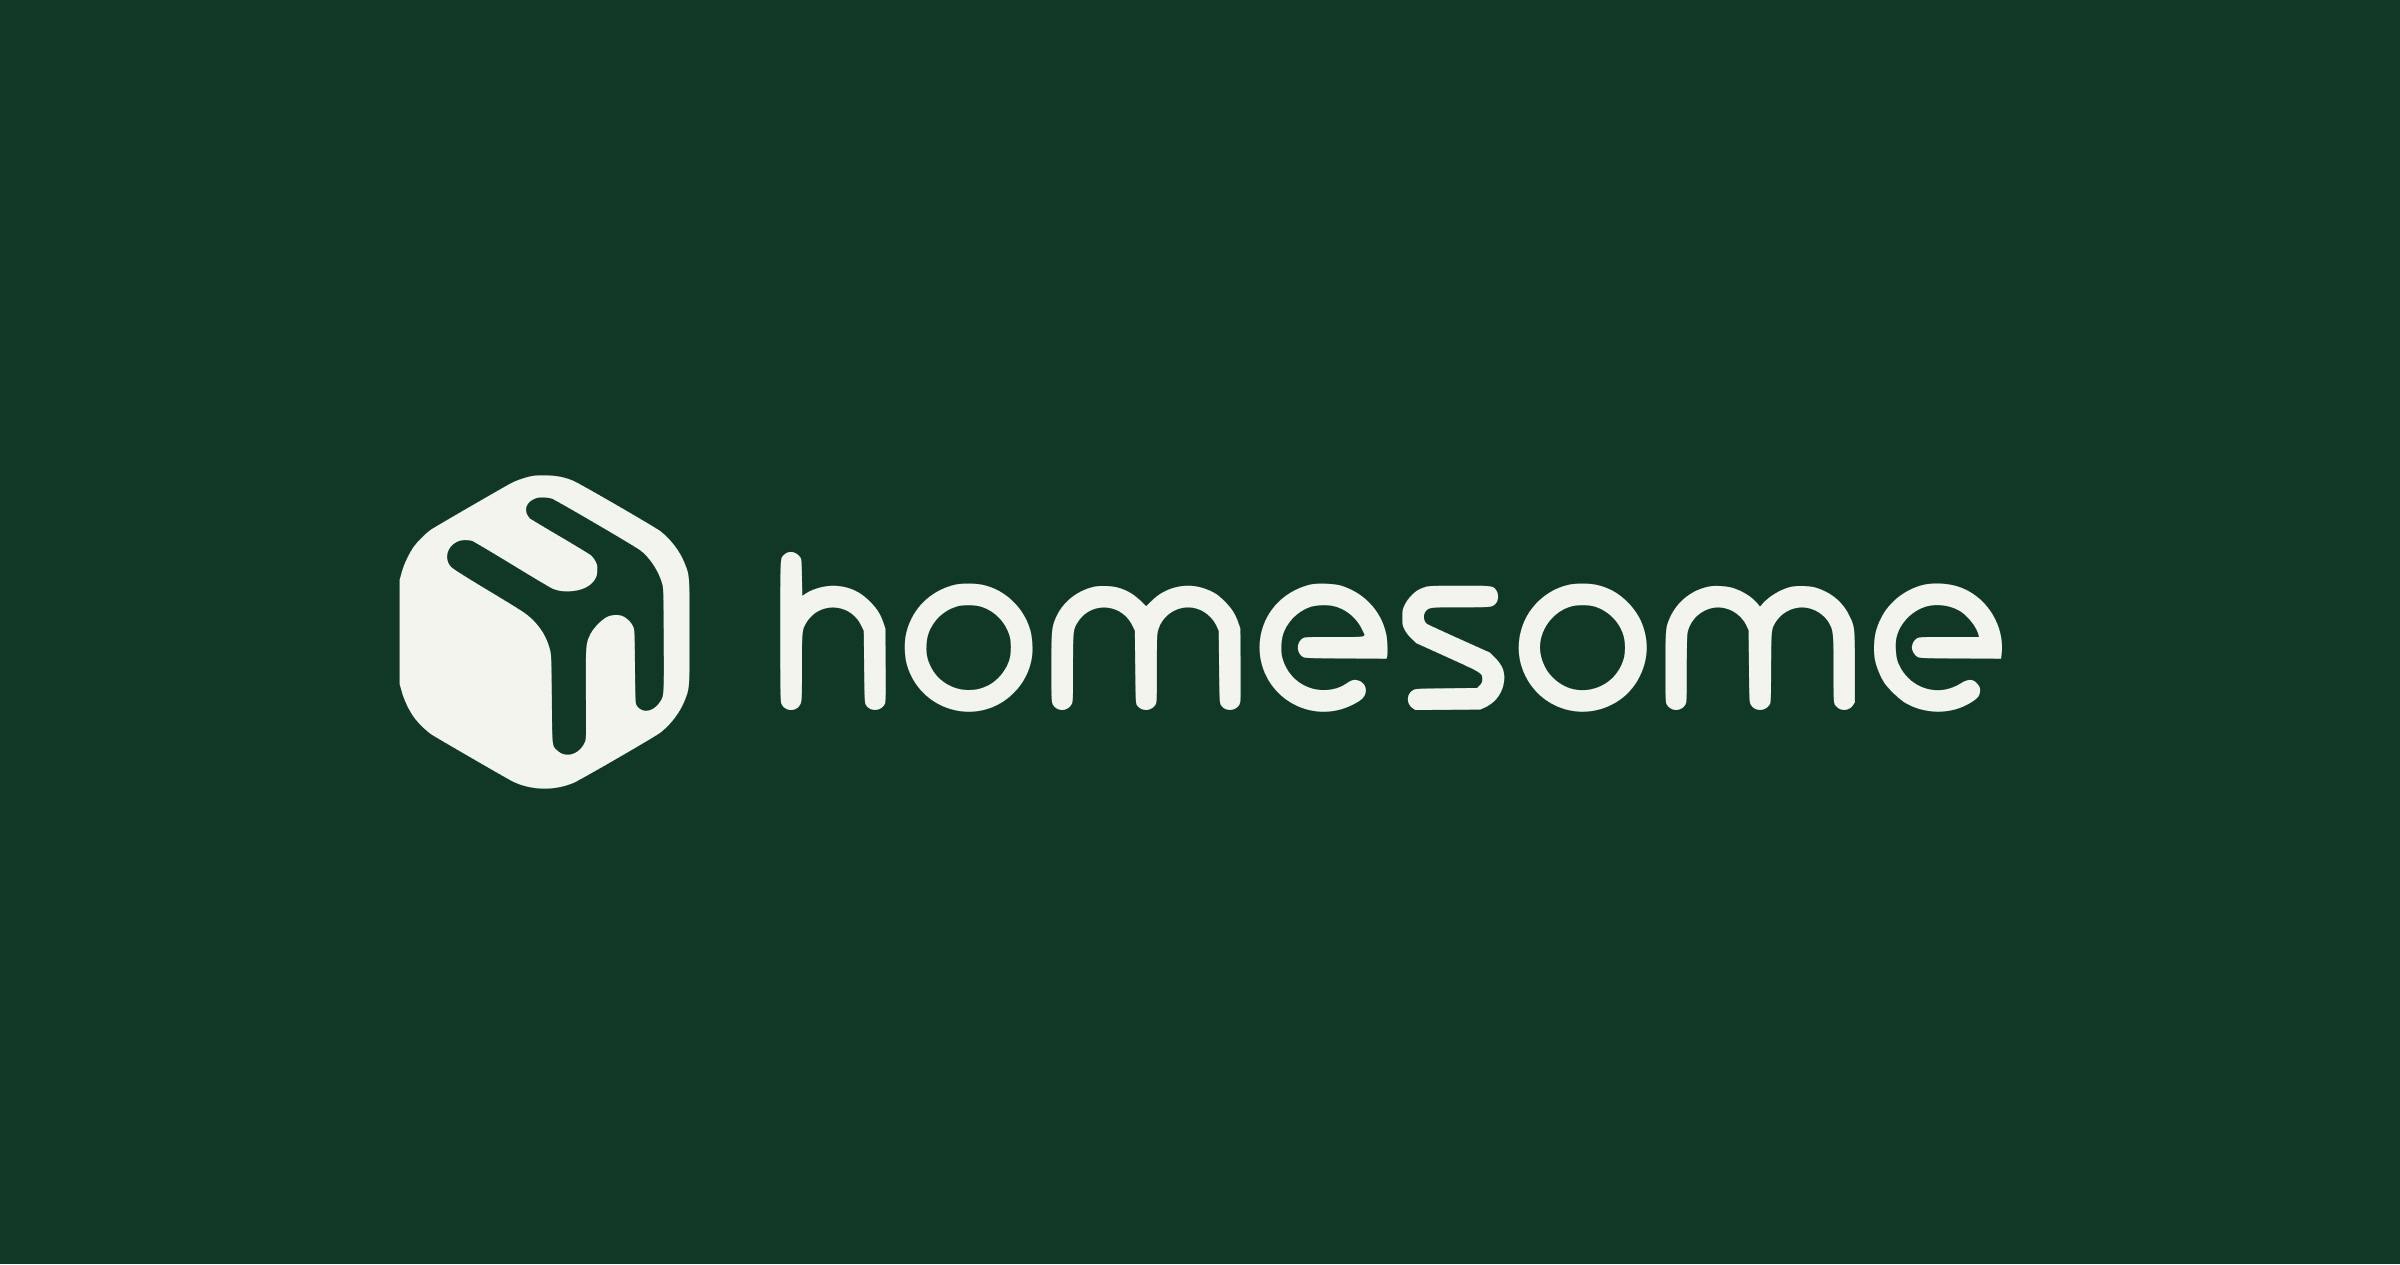 Cover Image for Homesome Partners with Forage to Accept EBT SNAP Payments Online